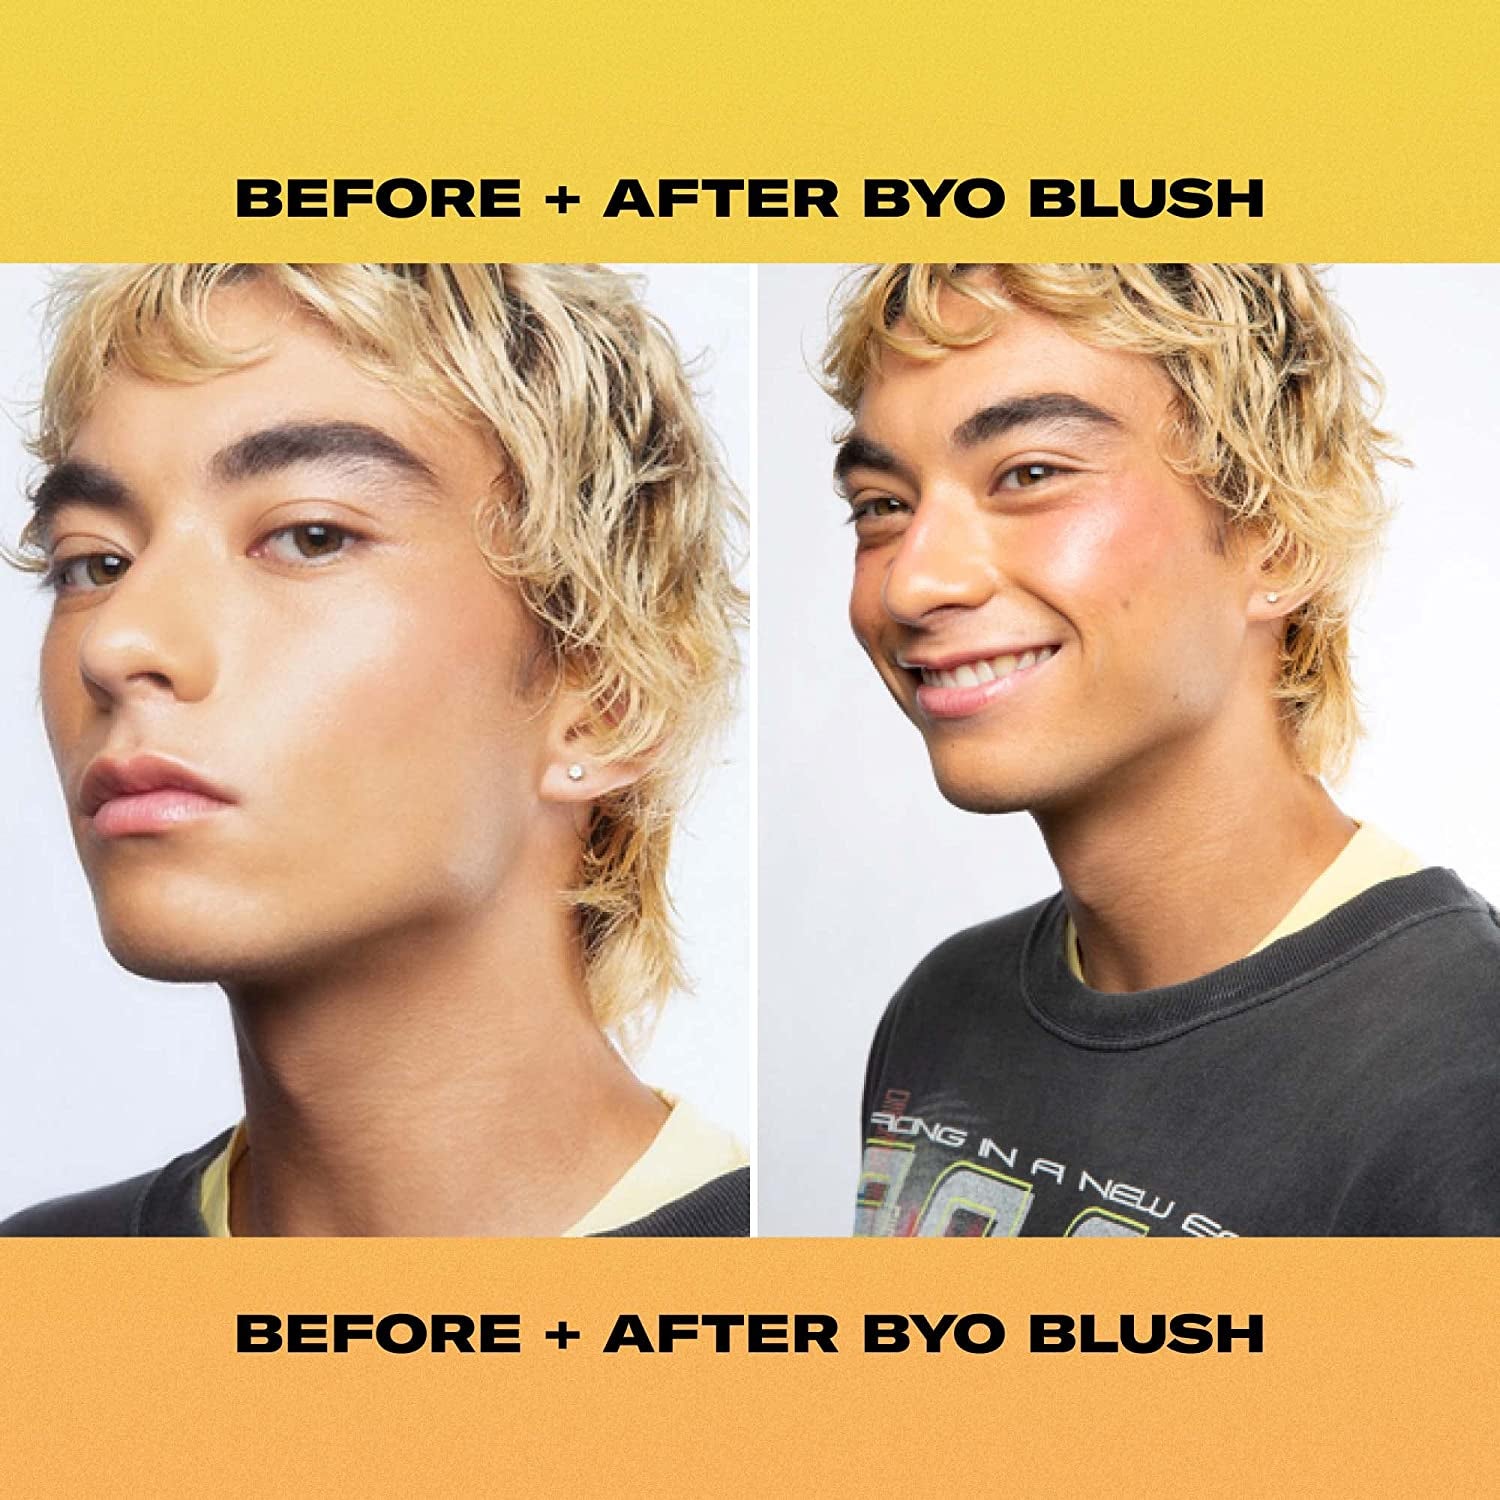 Before and after image of a model without and with a rosy toned blush on their cheeks 